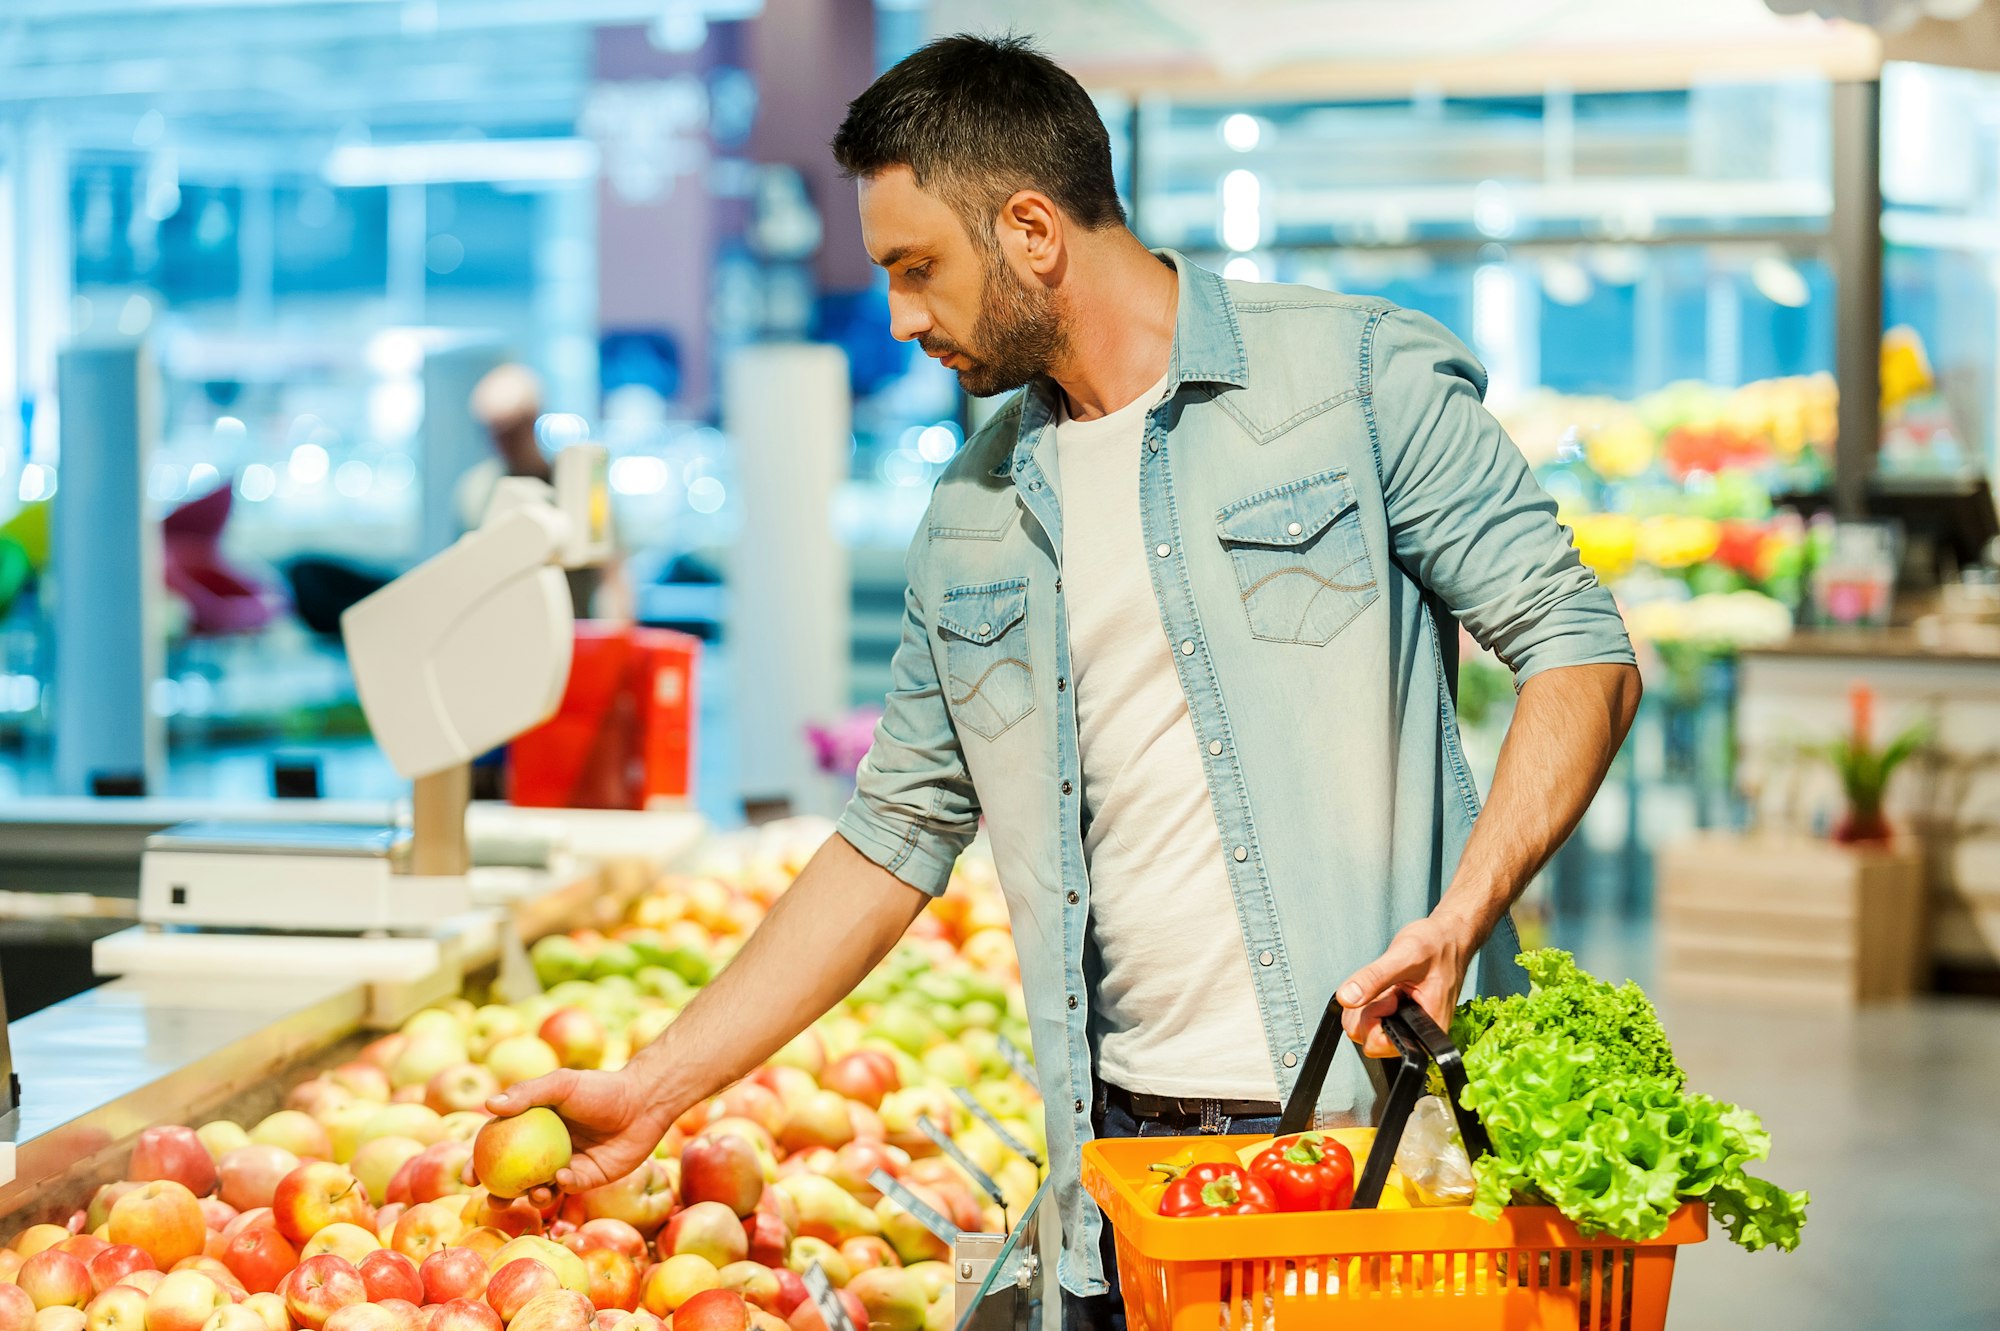 Man shopping for healthy foods in the produce section, choosing nutritious options for good oral health.